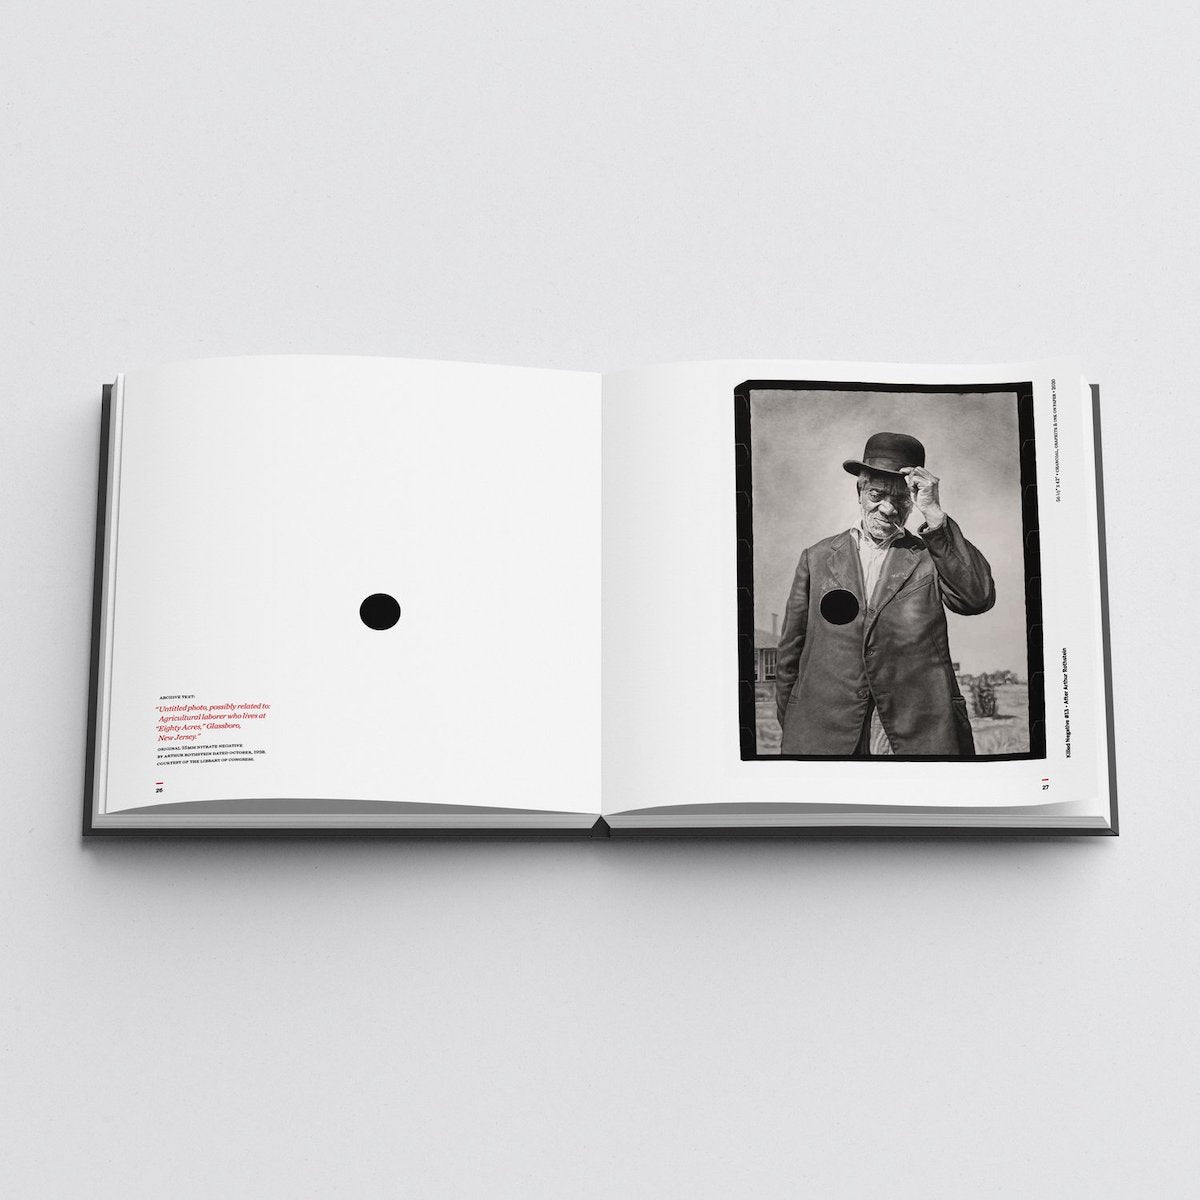 book pages, on left is drawing of man looking at viewer tipping his hat, cigarette in mouth